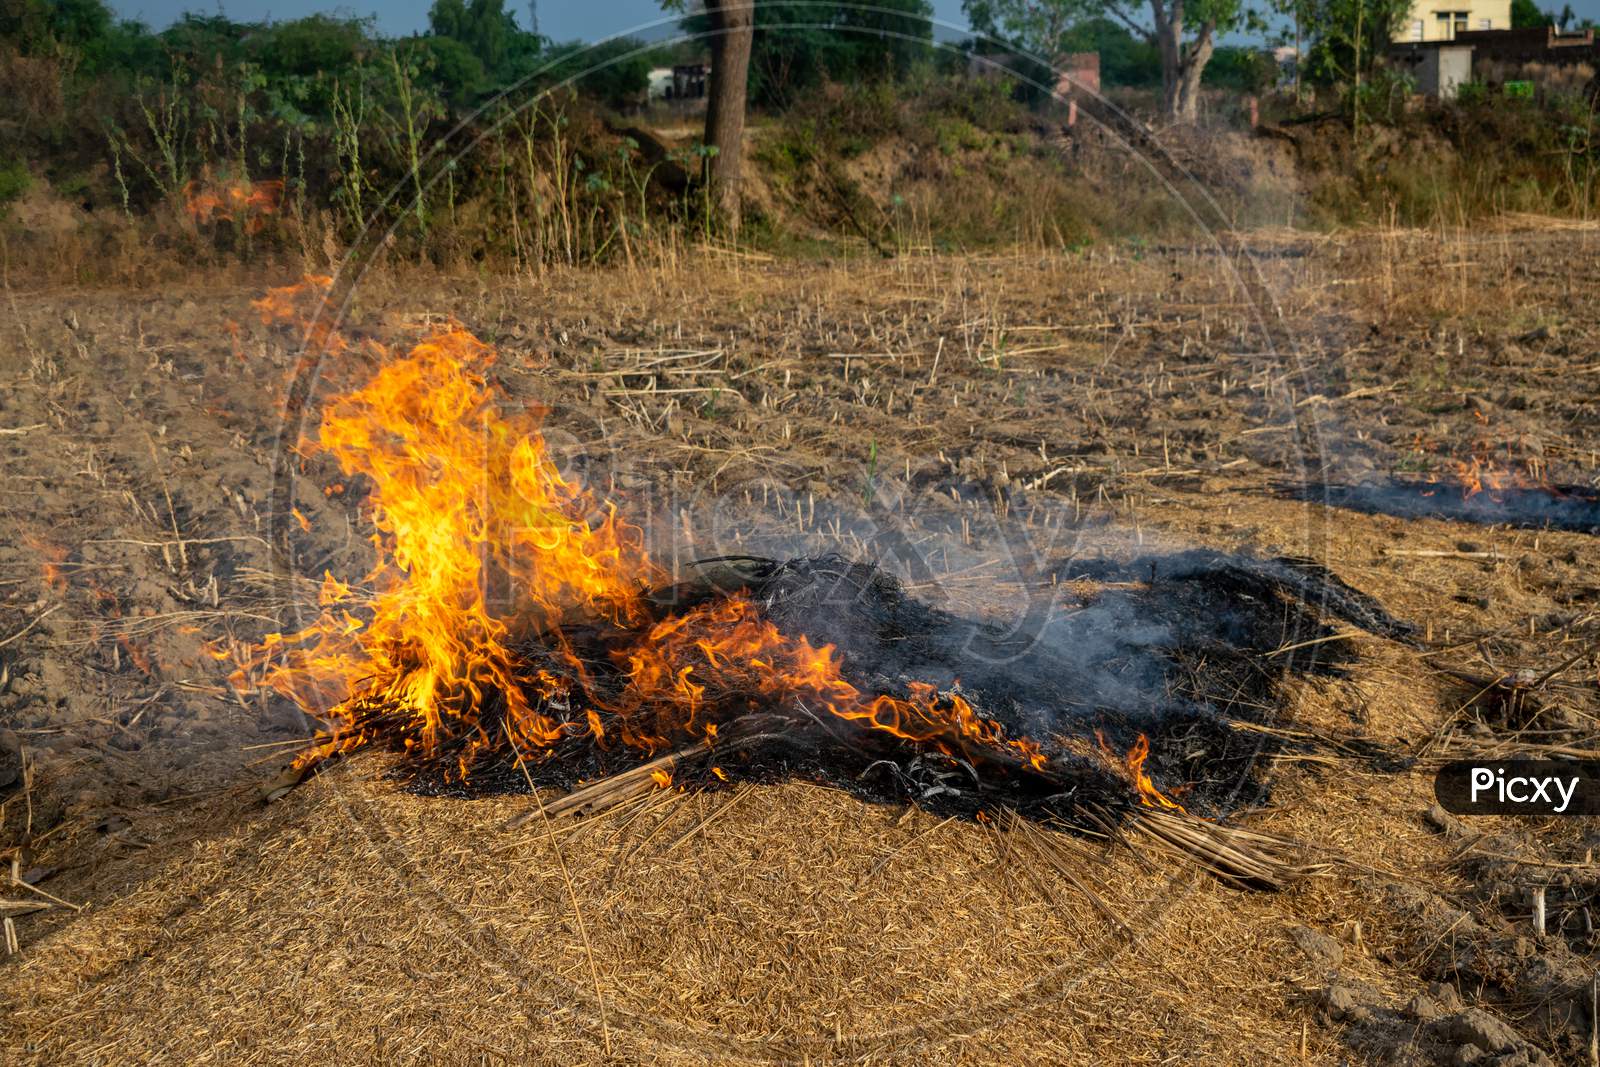 farm debris is being burnt by a farmer after harvesting of crops in a village